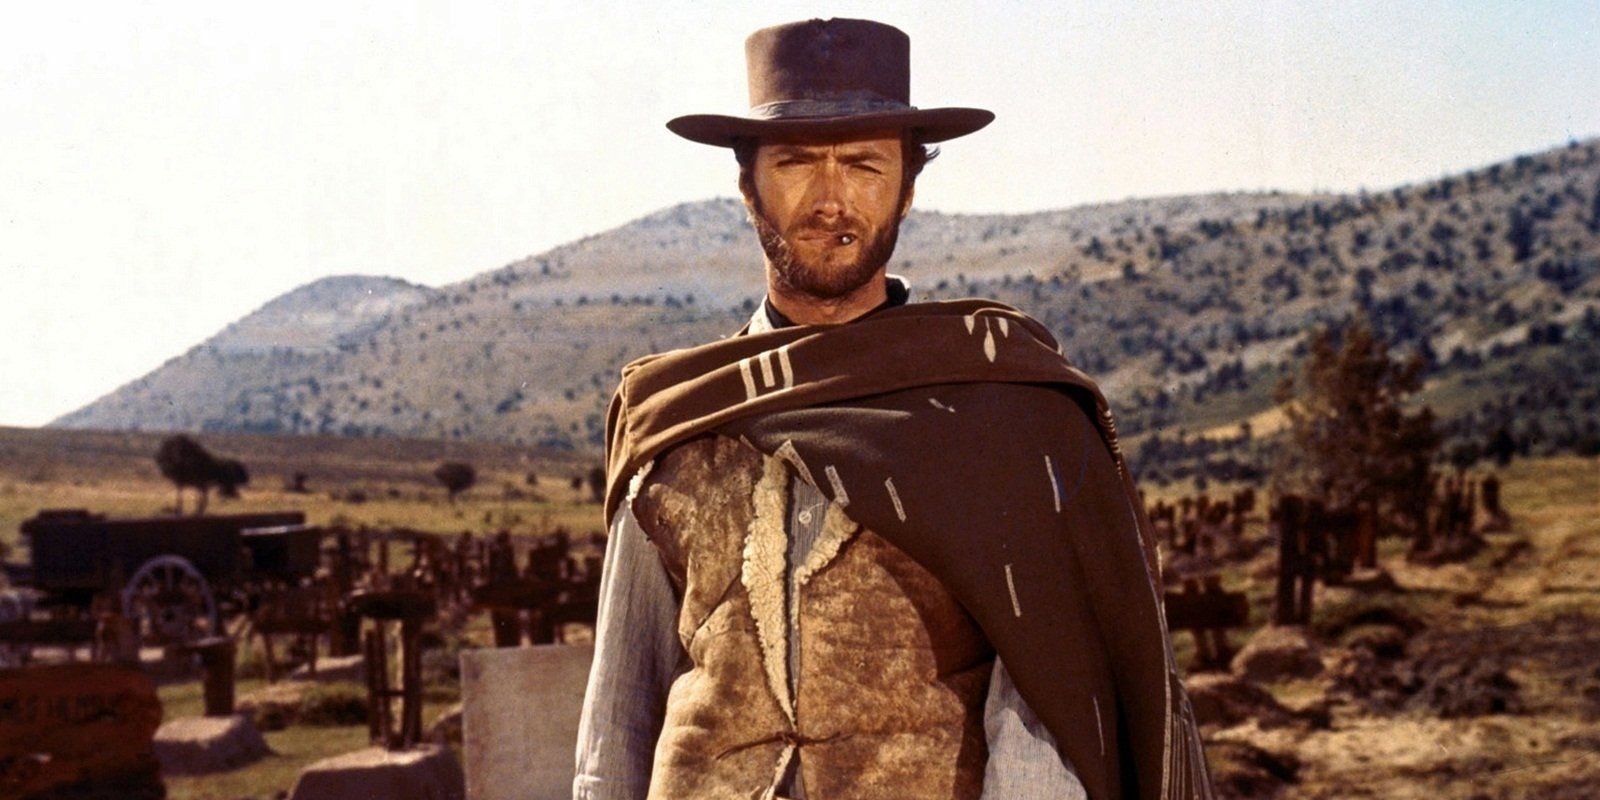 Clint Eastwood smoking a cigar in The Good, the Bad and the Ugly